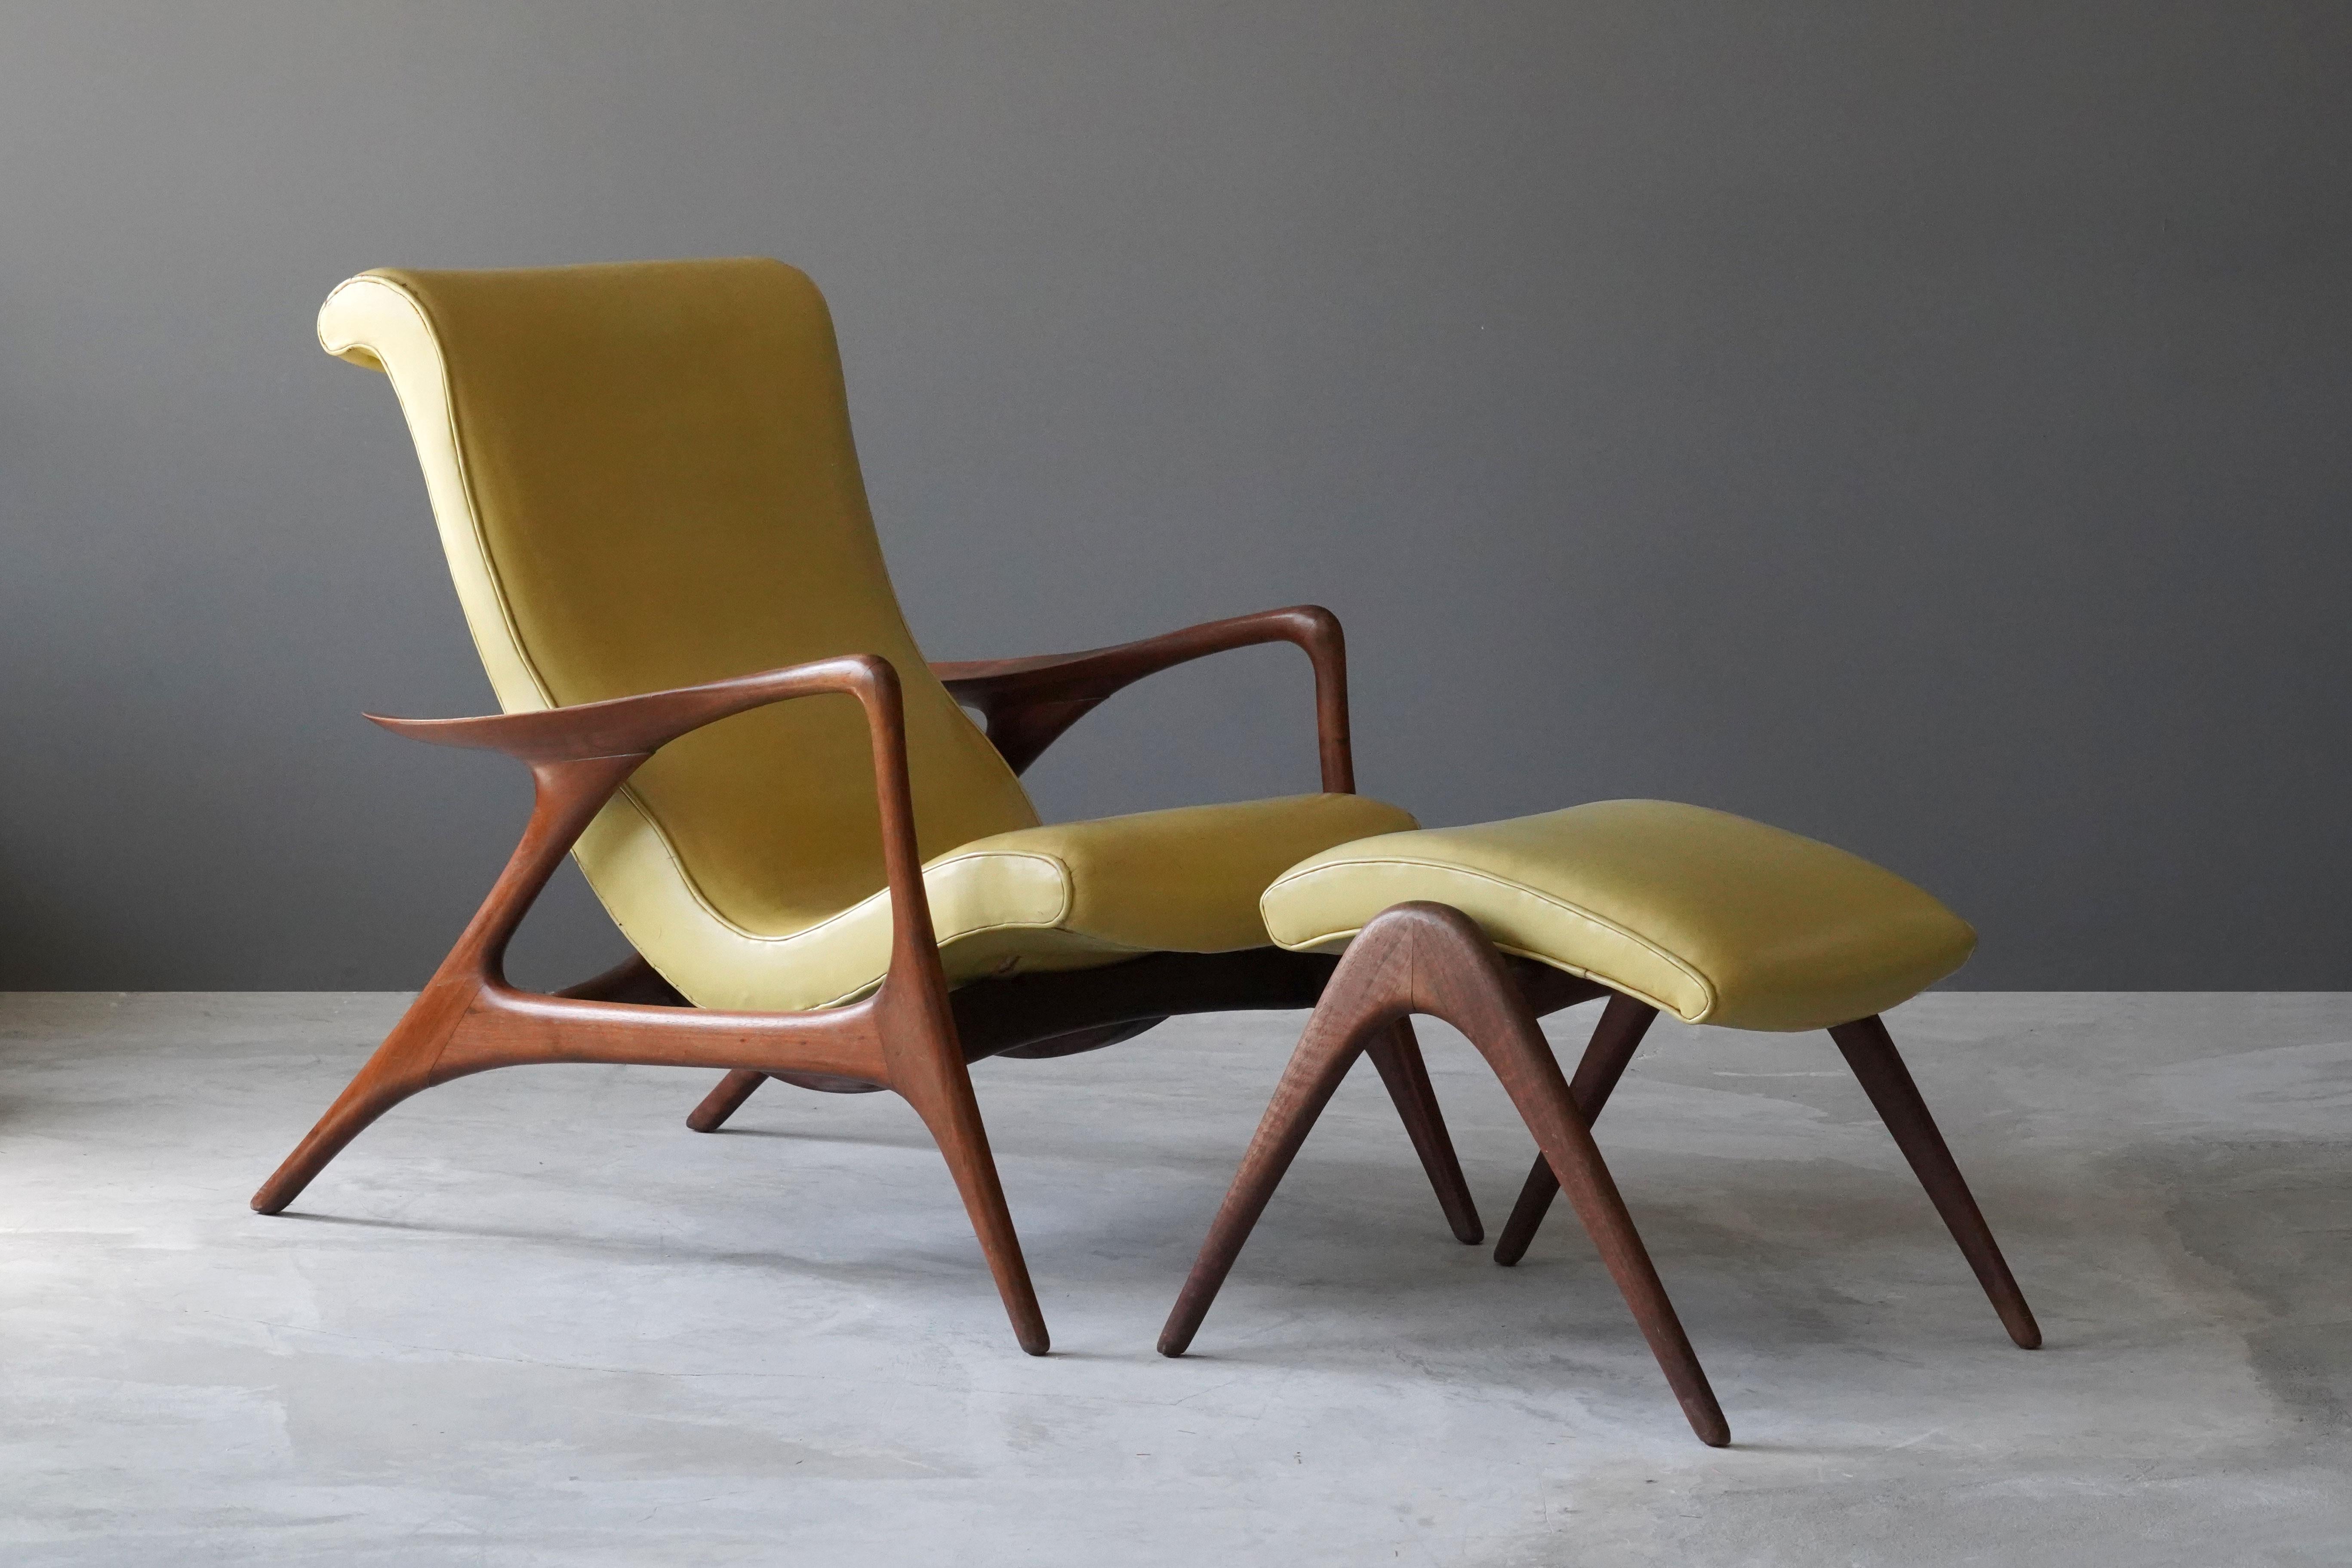 An early, all original adjustable organic lounge chair / armchair with ottoman by Vladimir Kagan. Sculpted walnut frame with overstuffed seat in original yellow leather. Bears label. 

Present example is a very rare adjustable version. Designed in